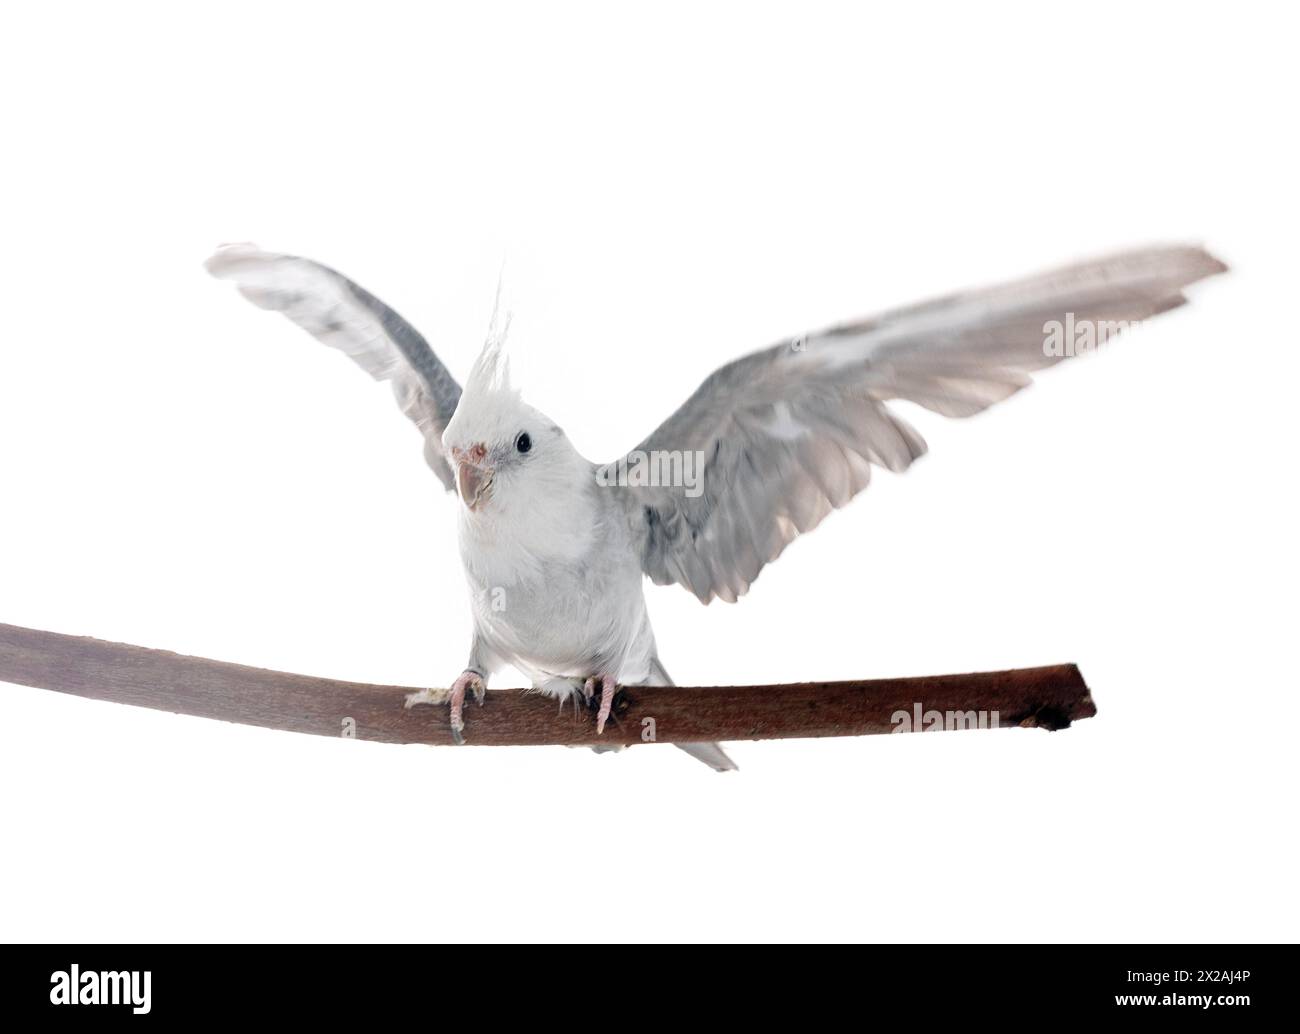 female gray cockatiel in front of white background Stock Photo